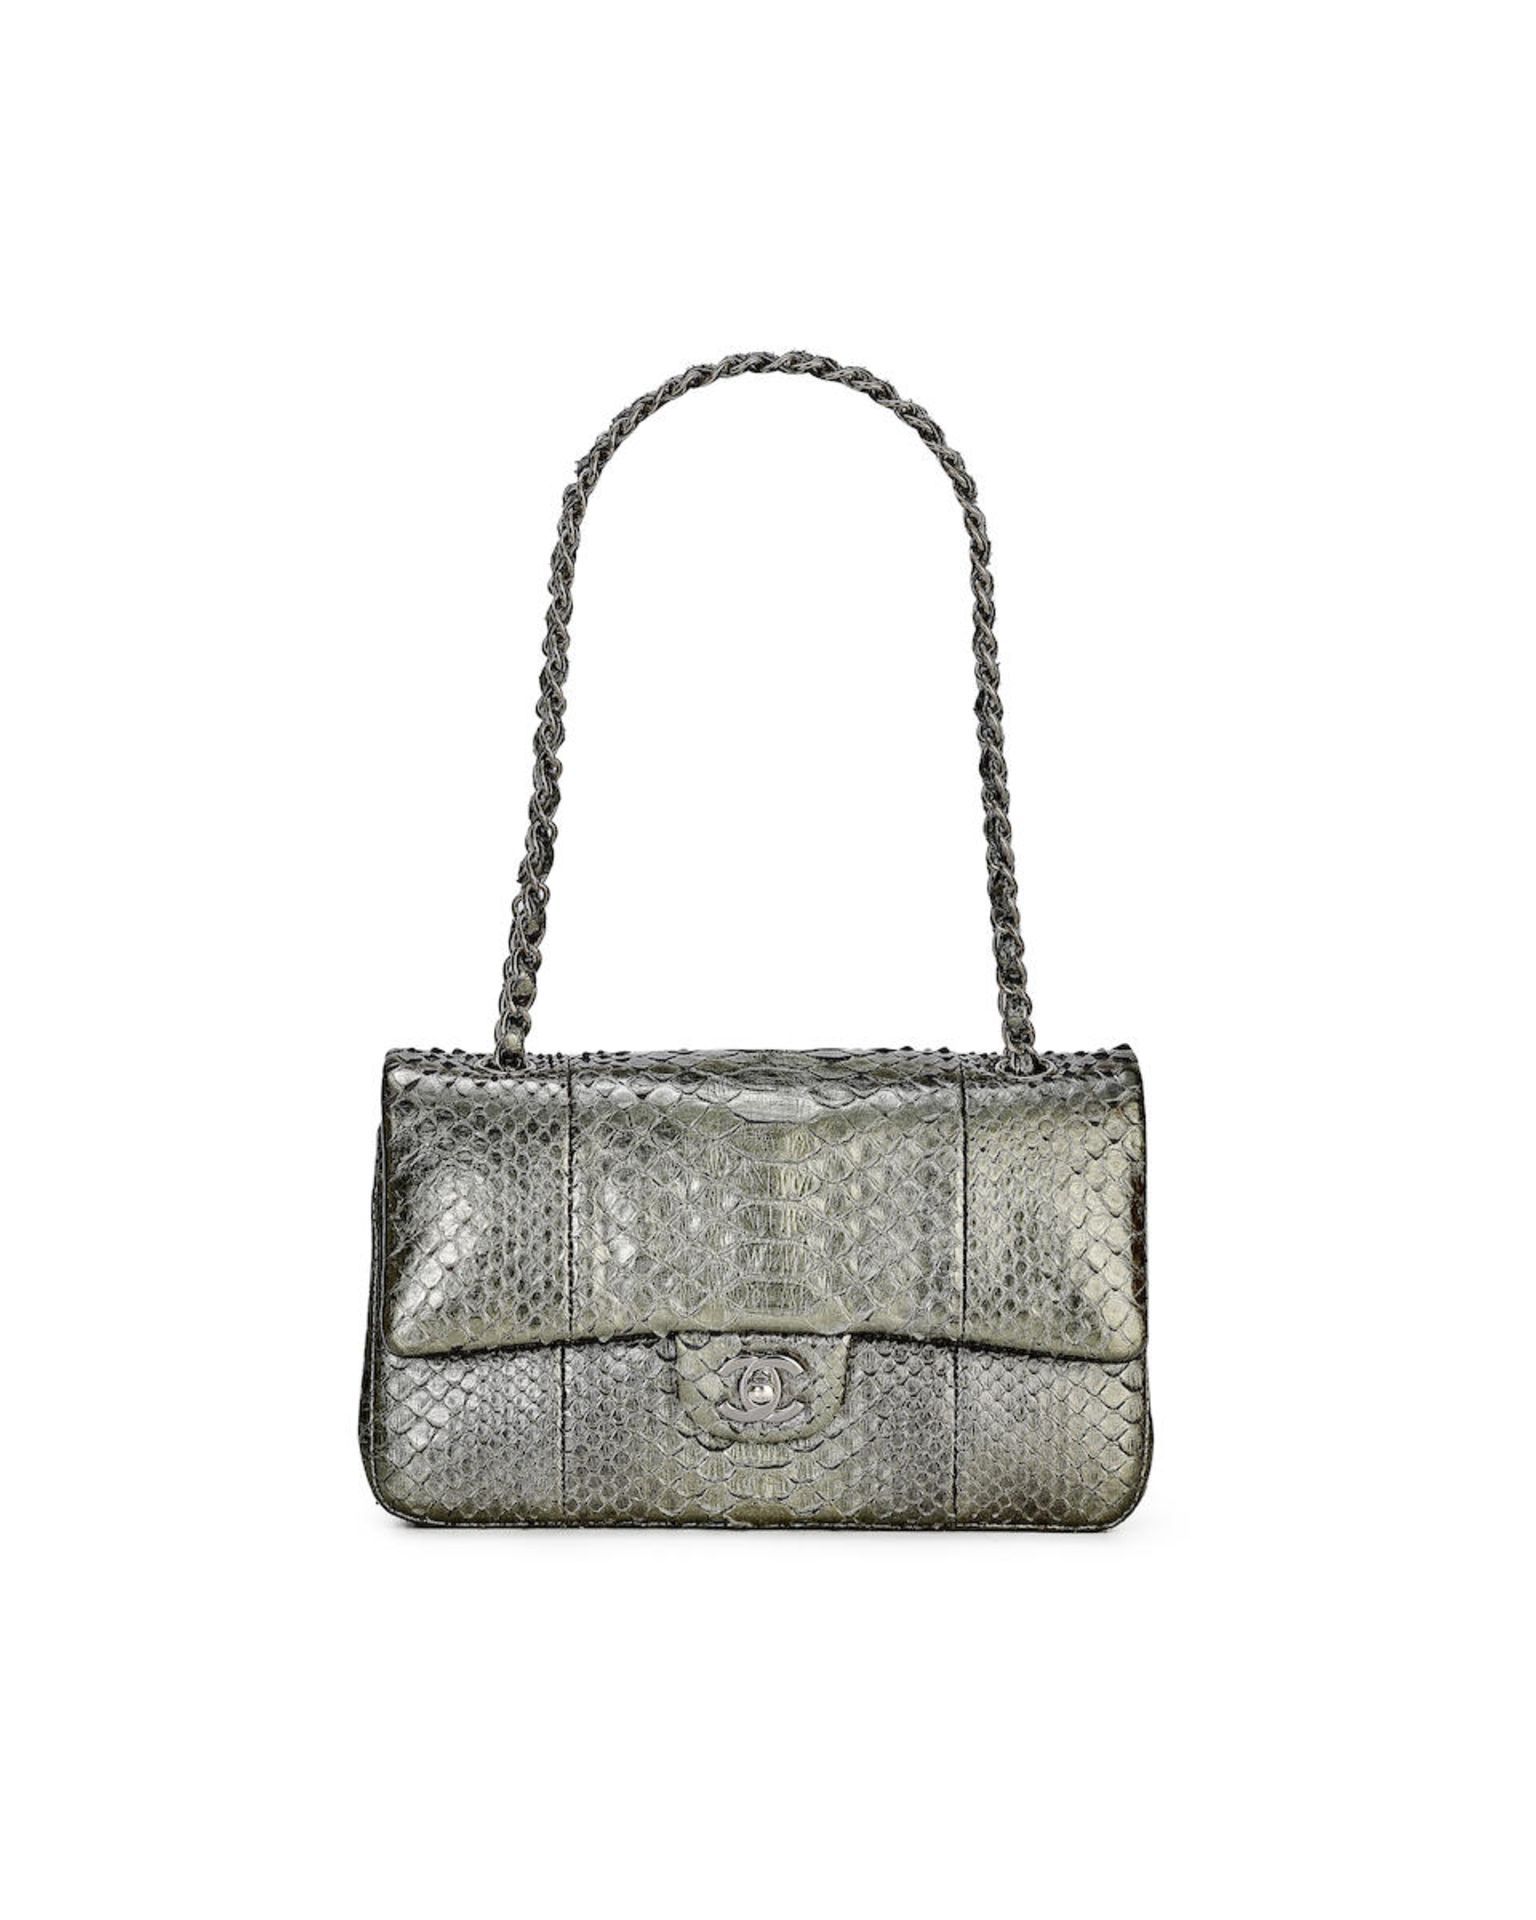 CHANEL: SHINY RAINBOW SHEEN BLACK PYTHON FLAP BAG WITH RUTHENIUM HARDWARE (Includes serial stick...